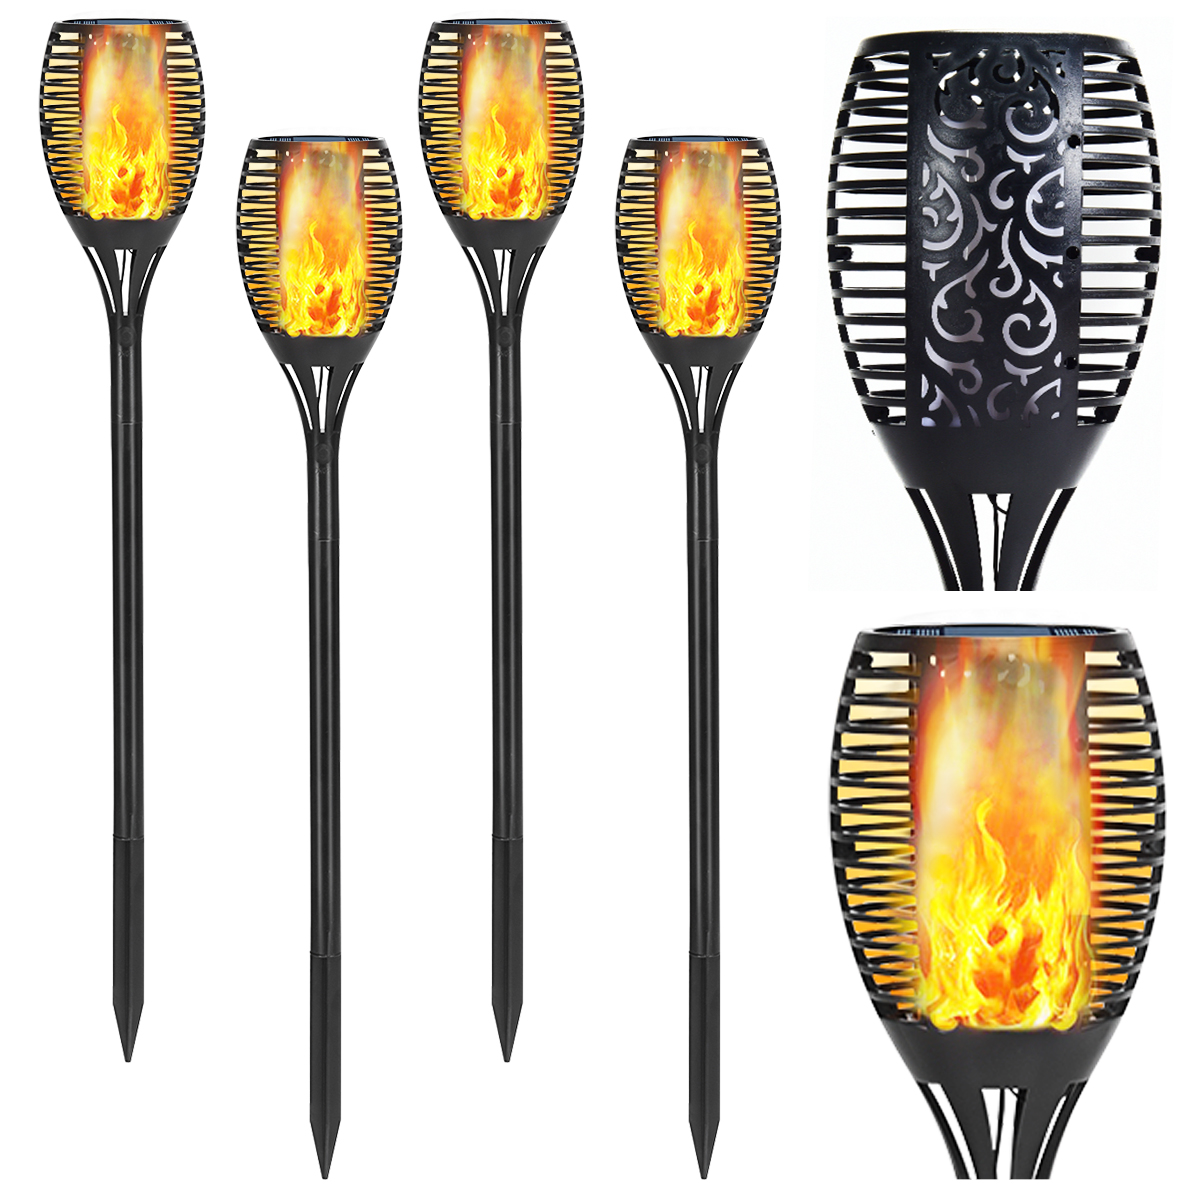 KOOPER Solar Lights Outdoor Decorative Patio Waterproof Landscape Tiki Torches Decoration for Yard 4 Pack Solar Torch Light with Flickering Flame Garden